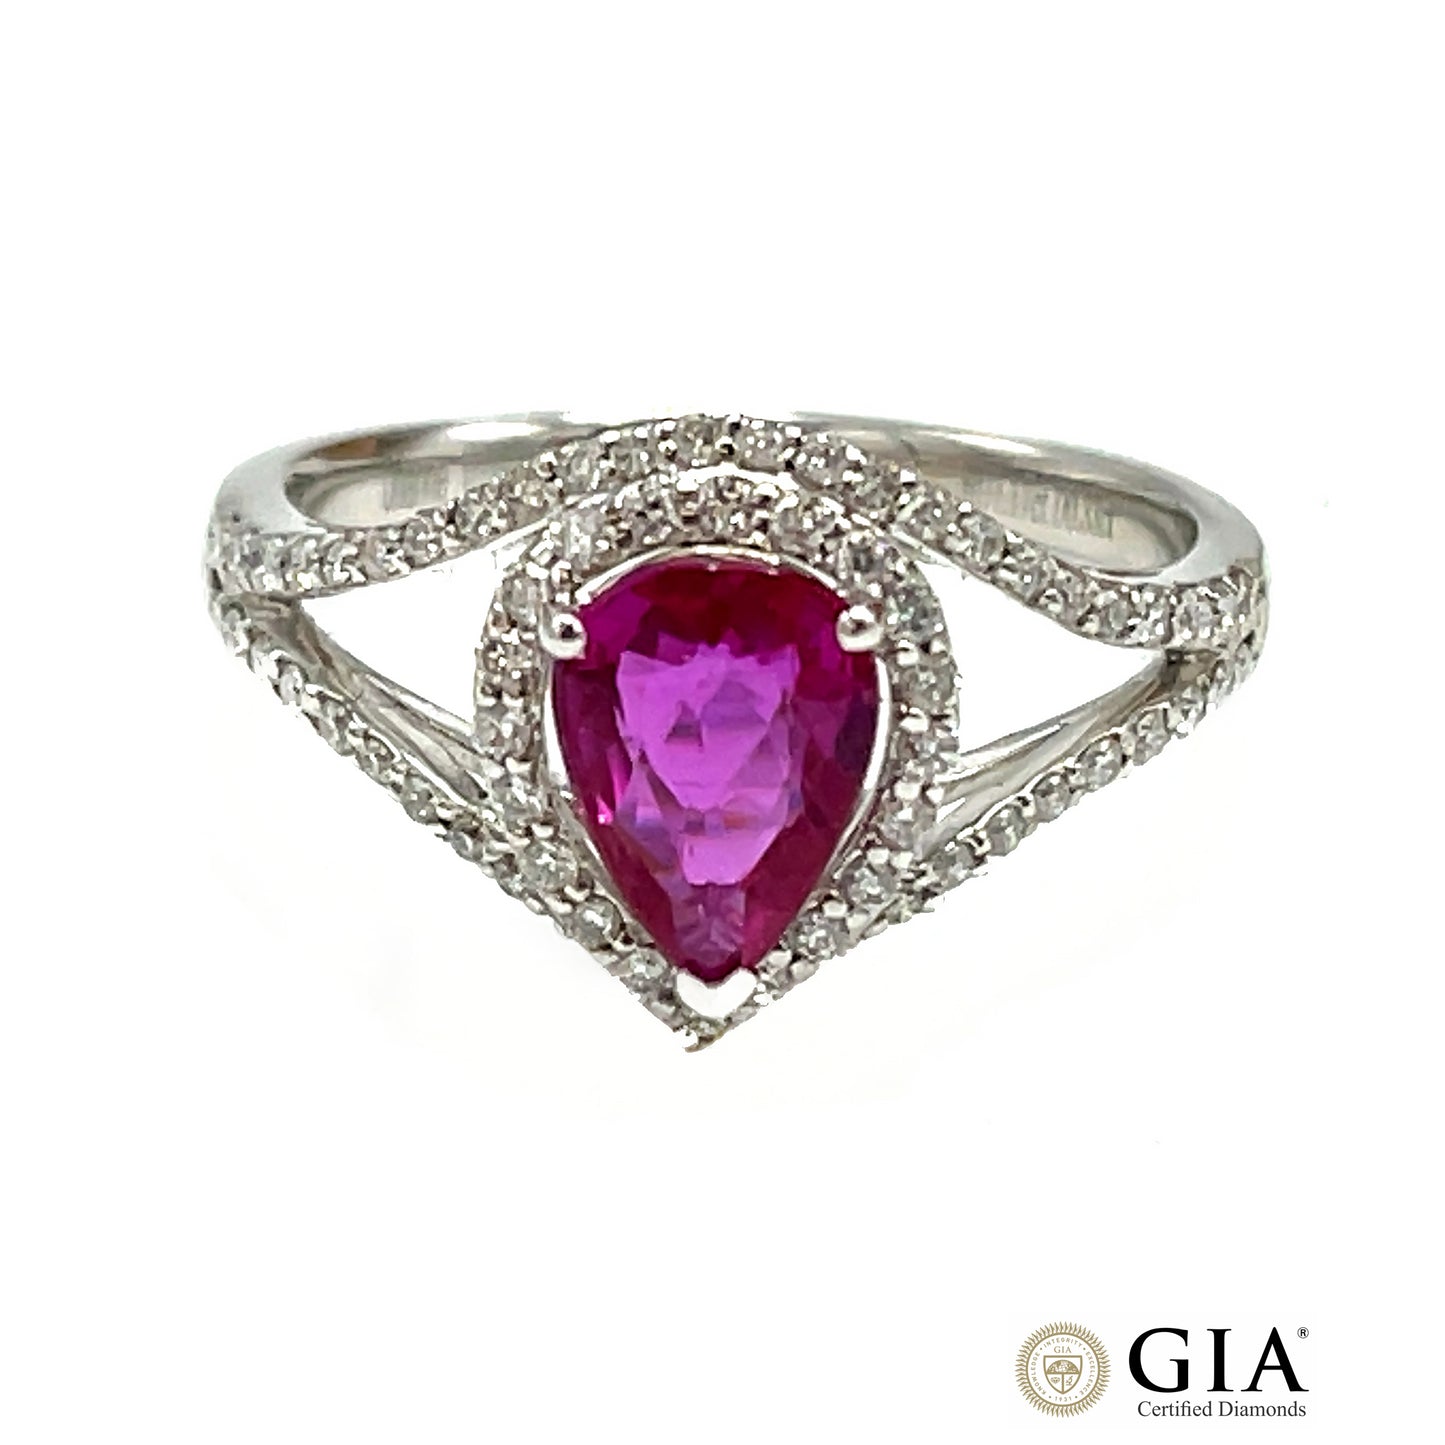 Orianne GIA Certified No-Heat Pear-Shaped Ruby Ring